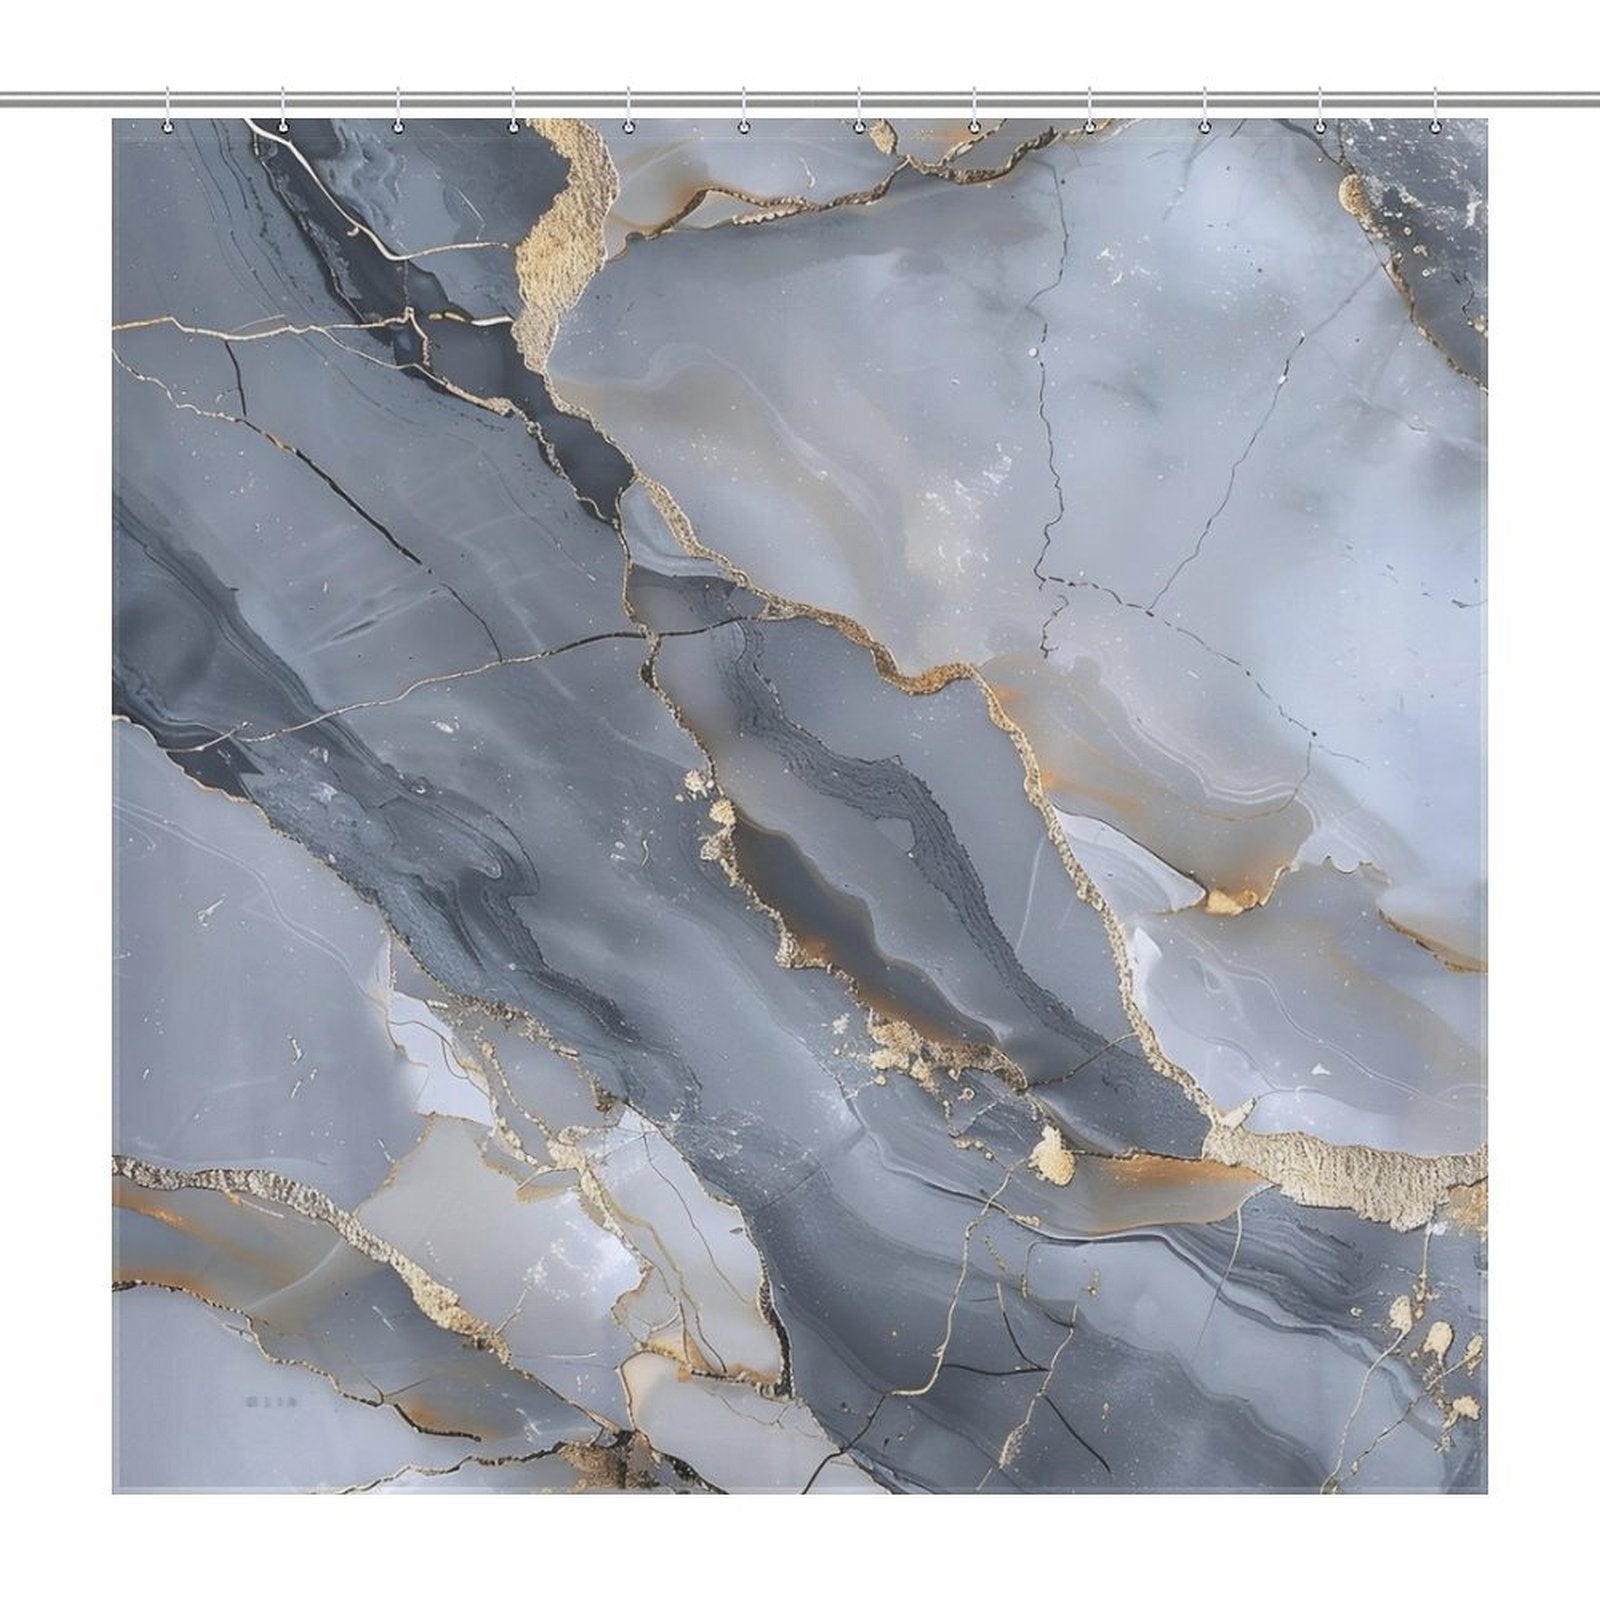 A Gray Gold Stripe Abstract Marble Texture Art Shower Curtain-Cottoncat by Cotton Cat features a gray and gold marble pattern with abstract veining and textures, hanging from a metal rod.